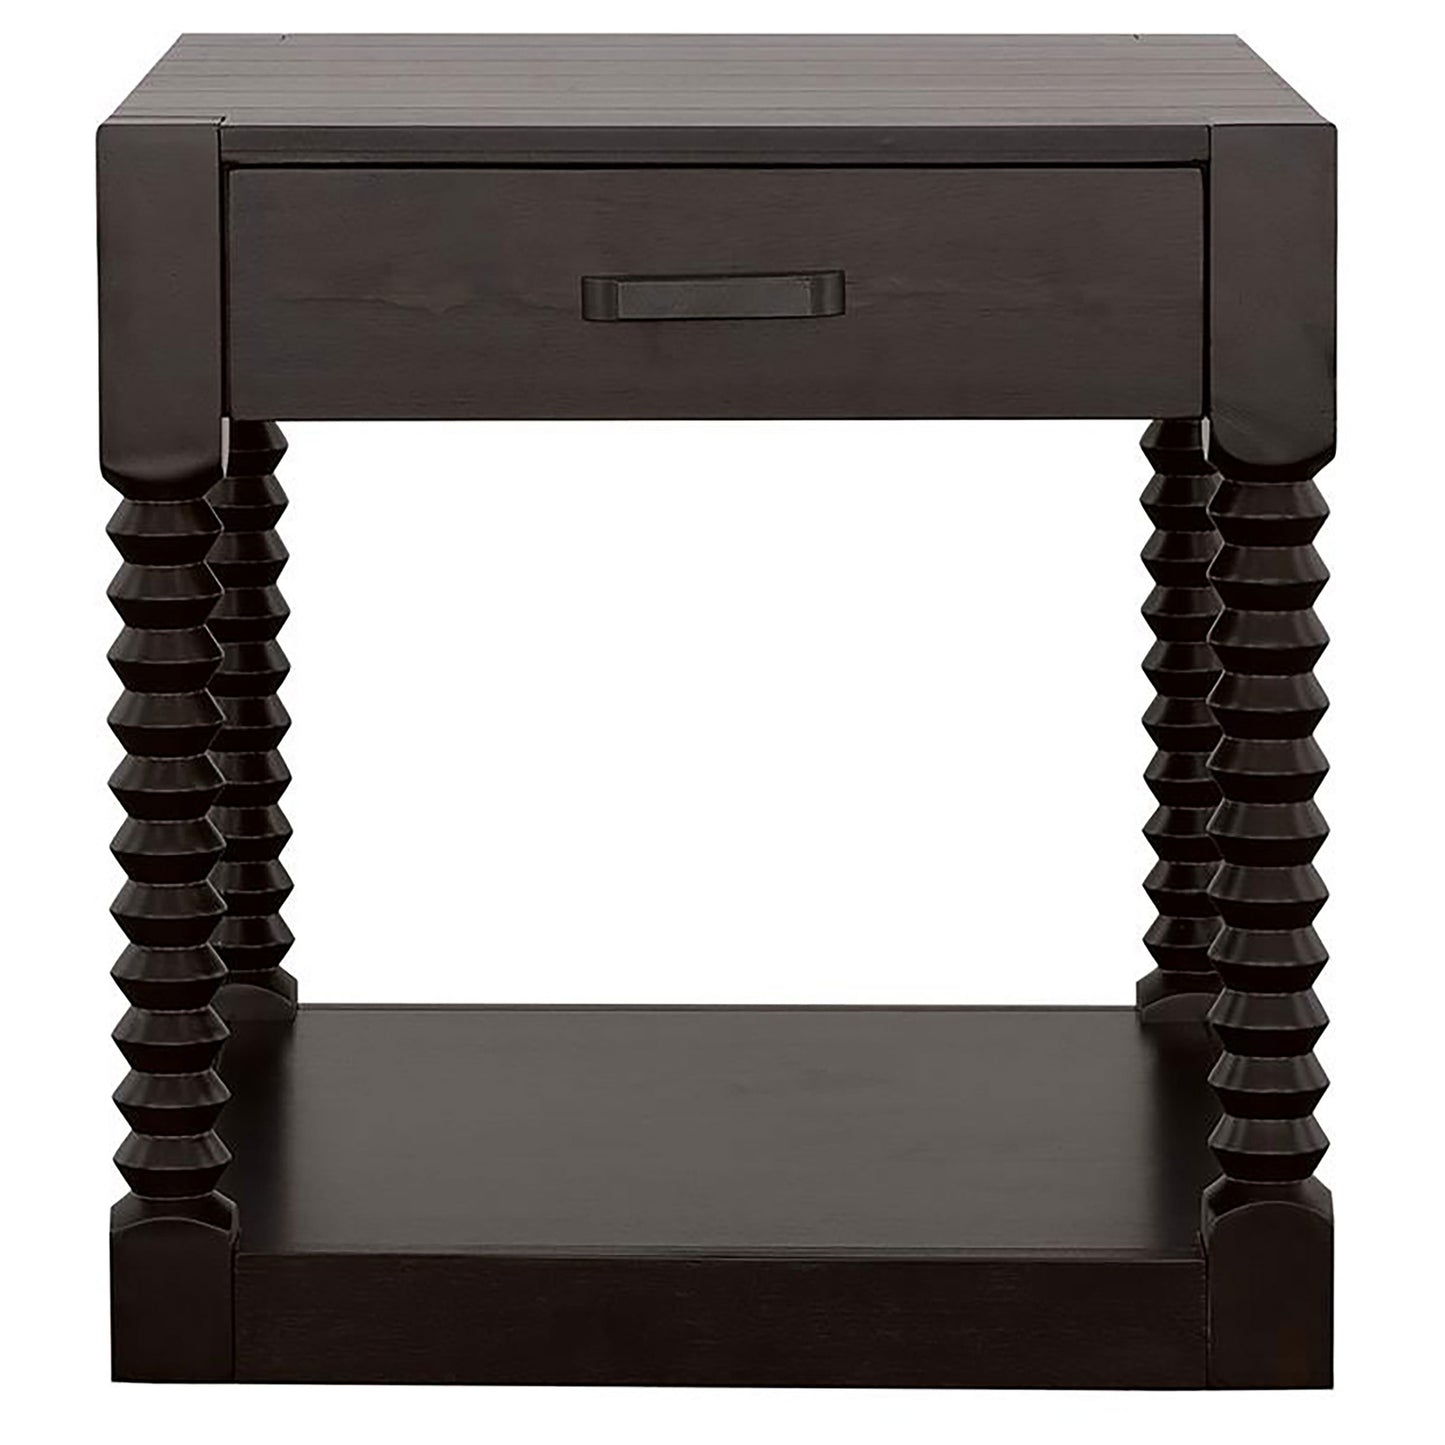 Meredith 1-drawer End Table Coffee Bean